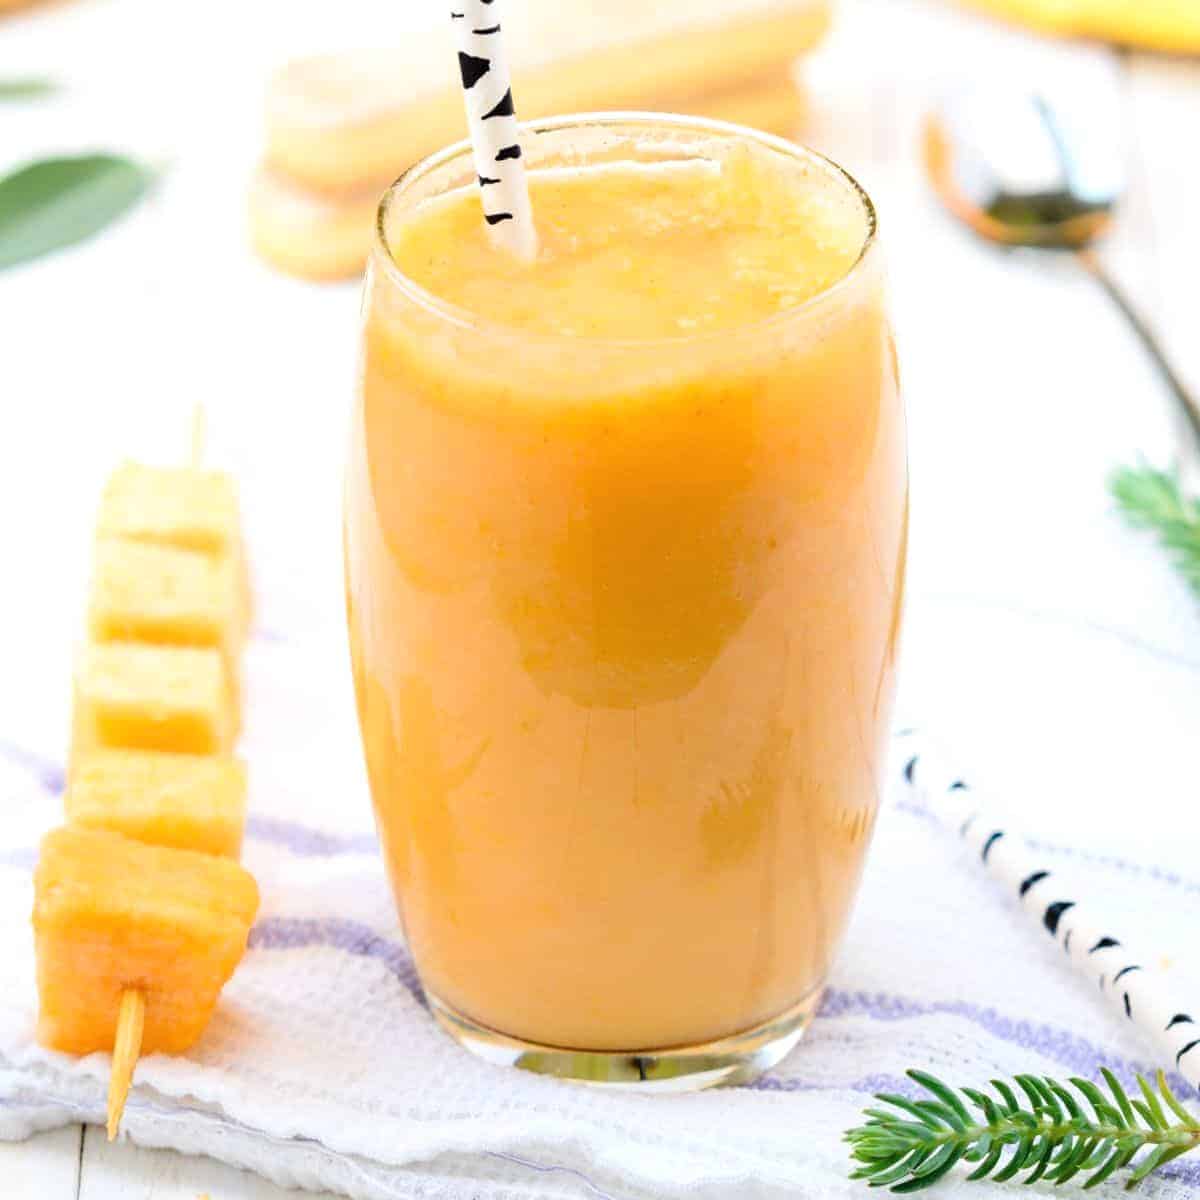 How to Make Bugs Bunny Carrot Juice Immune-Boosting Smoothie, a kid friendly smoothie recipe.